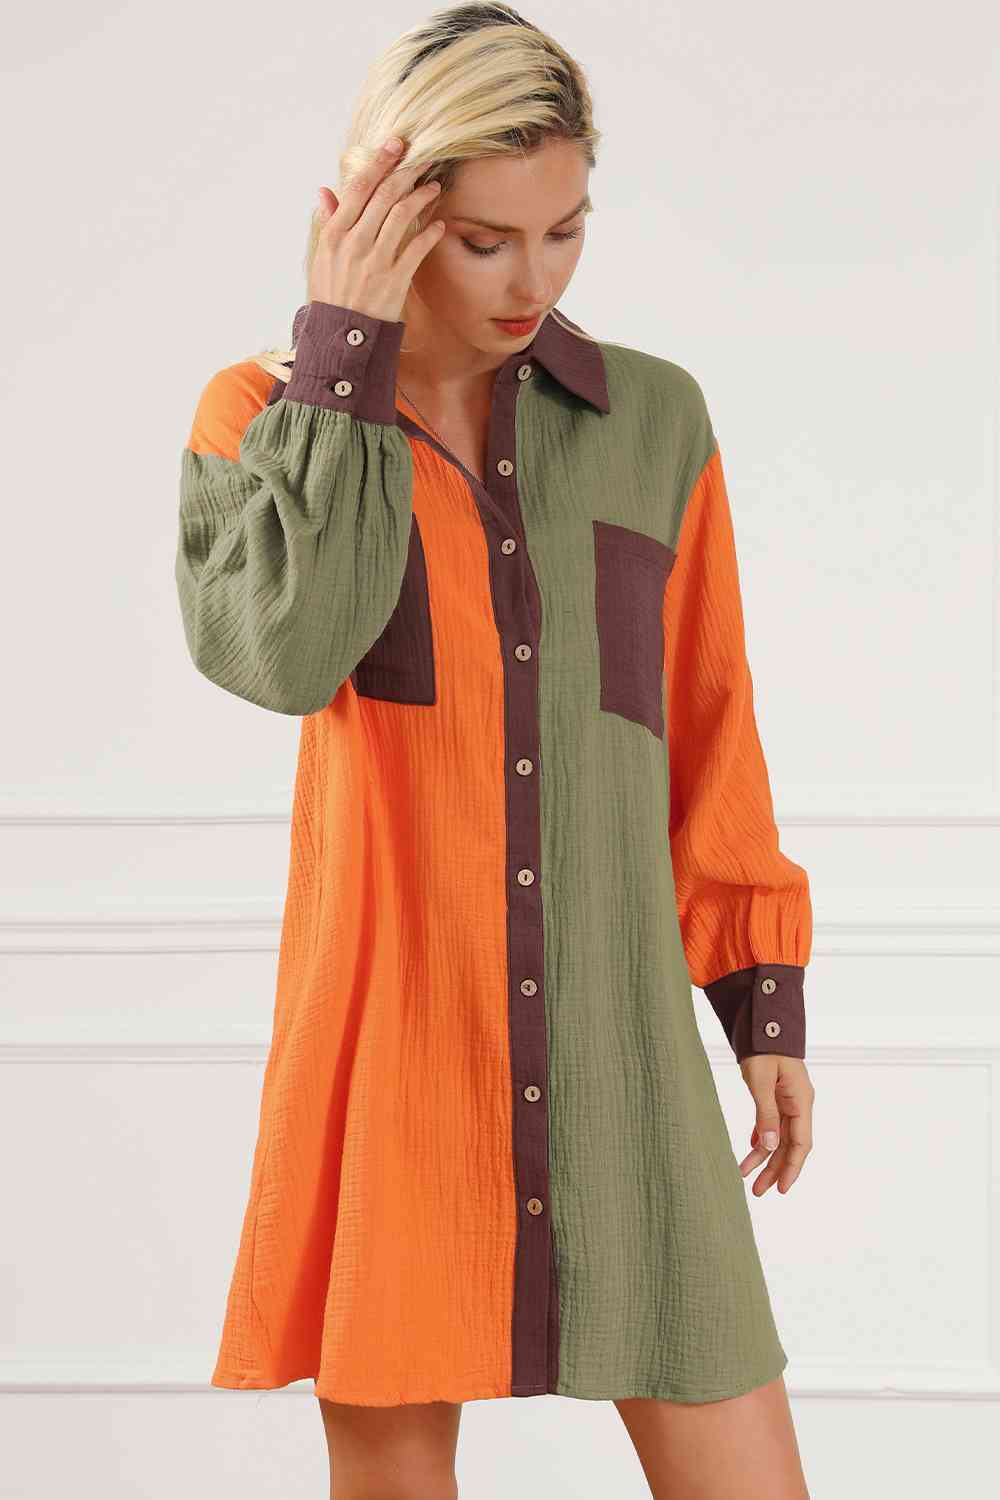 Contrast Button Up Collared Neck Dress at Kamakhyaa by Trendsi. This item is Ship From Overseas, SYNZ, Trendsi, Womenswear